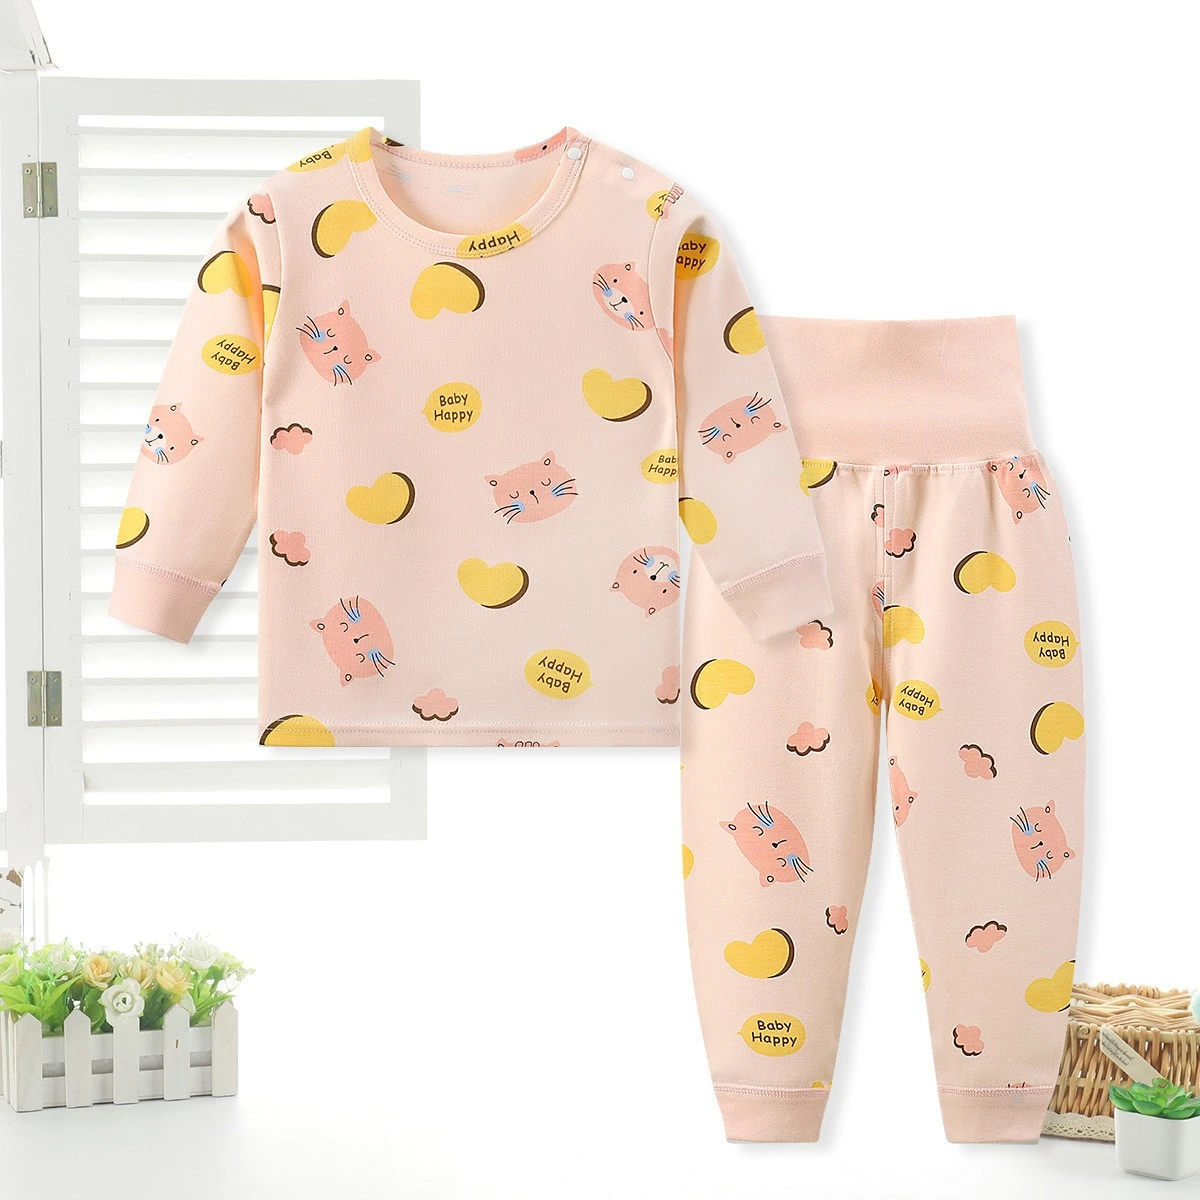 6 9 12 18 Month Baby Boutiique Suit Baby Girl Clothes Winter Casual 2 Piece Set Pure Cotton Children Pajamas Baby Girl Outfits vintage Baby Clothing Set